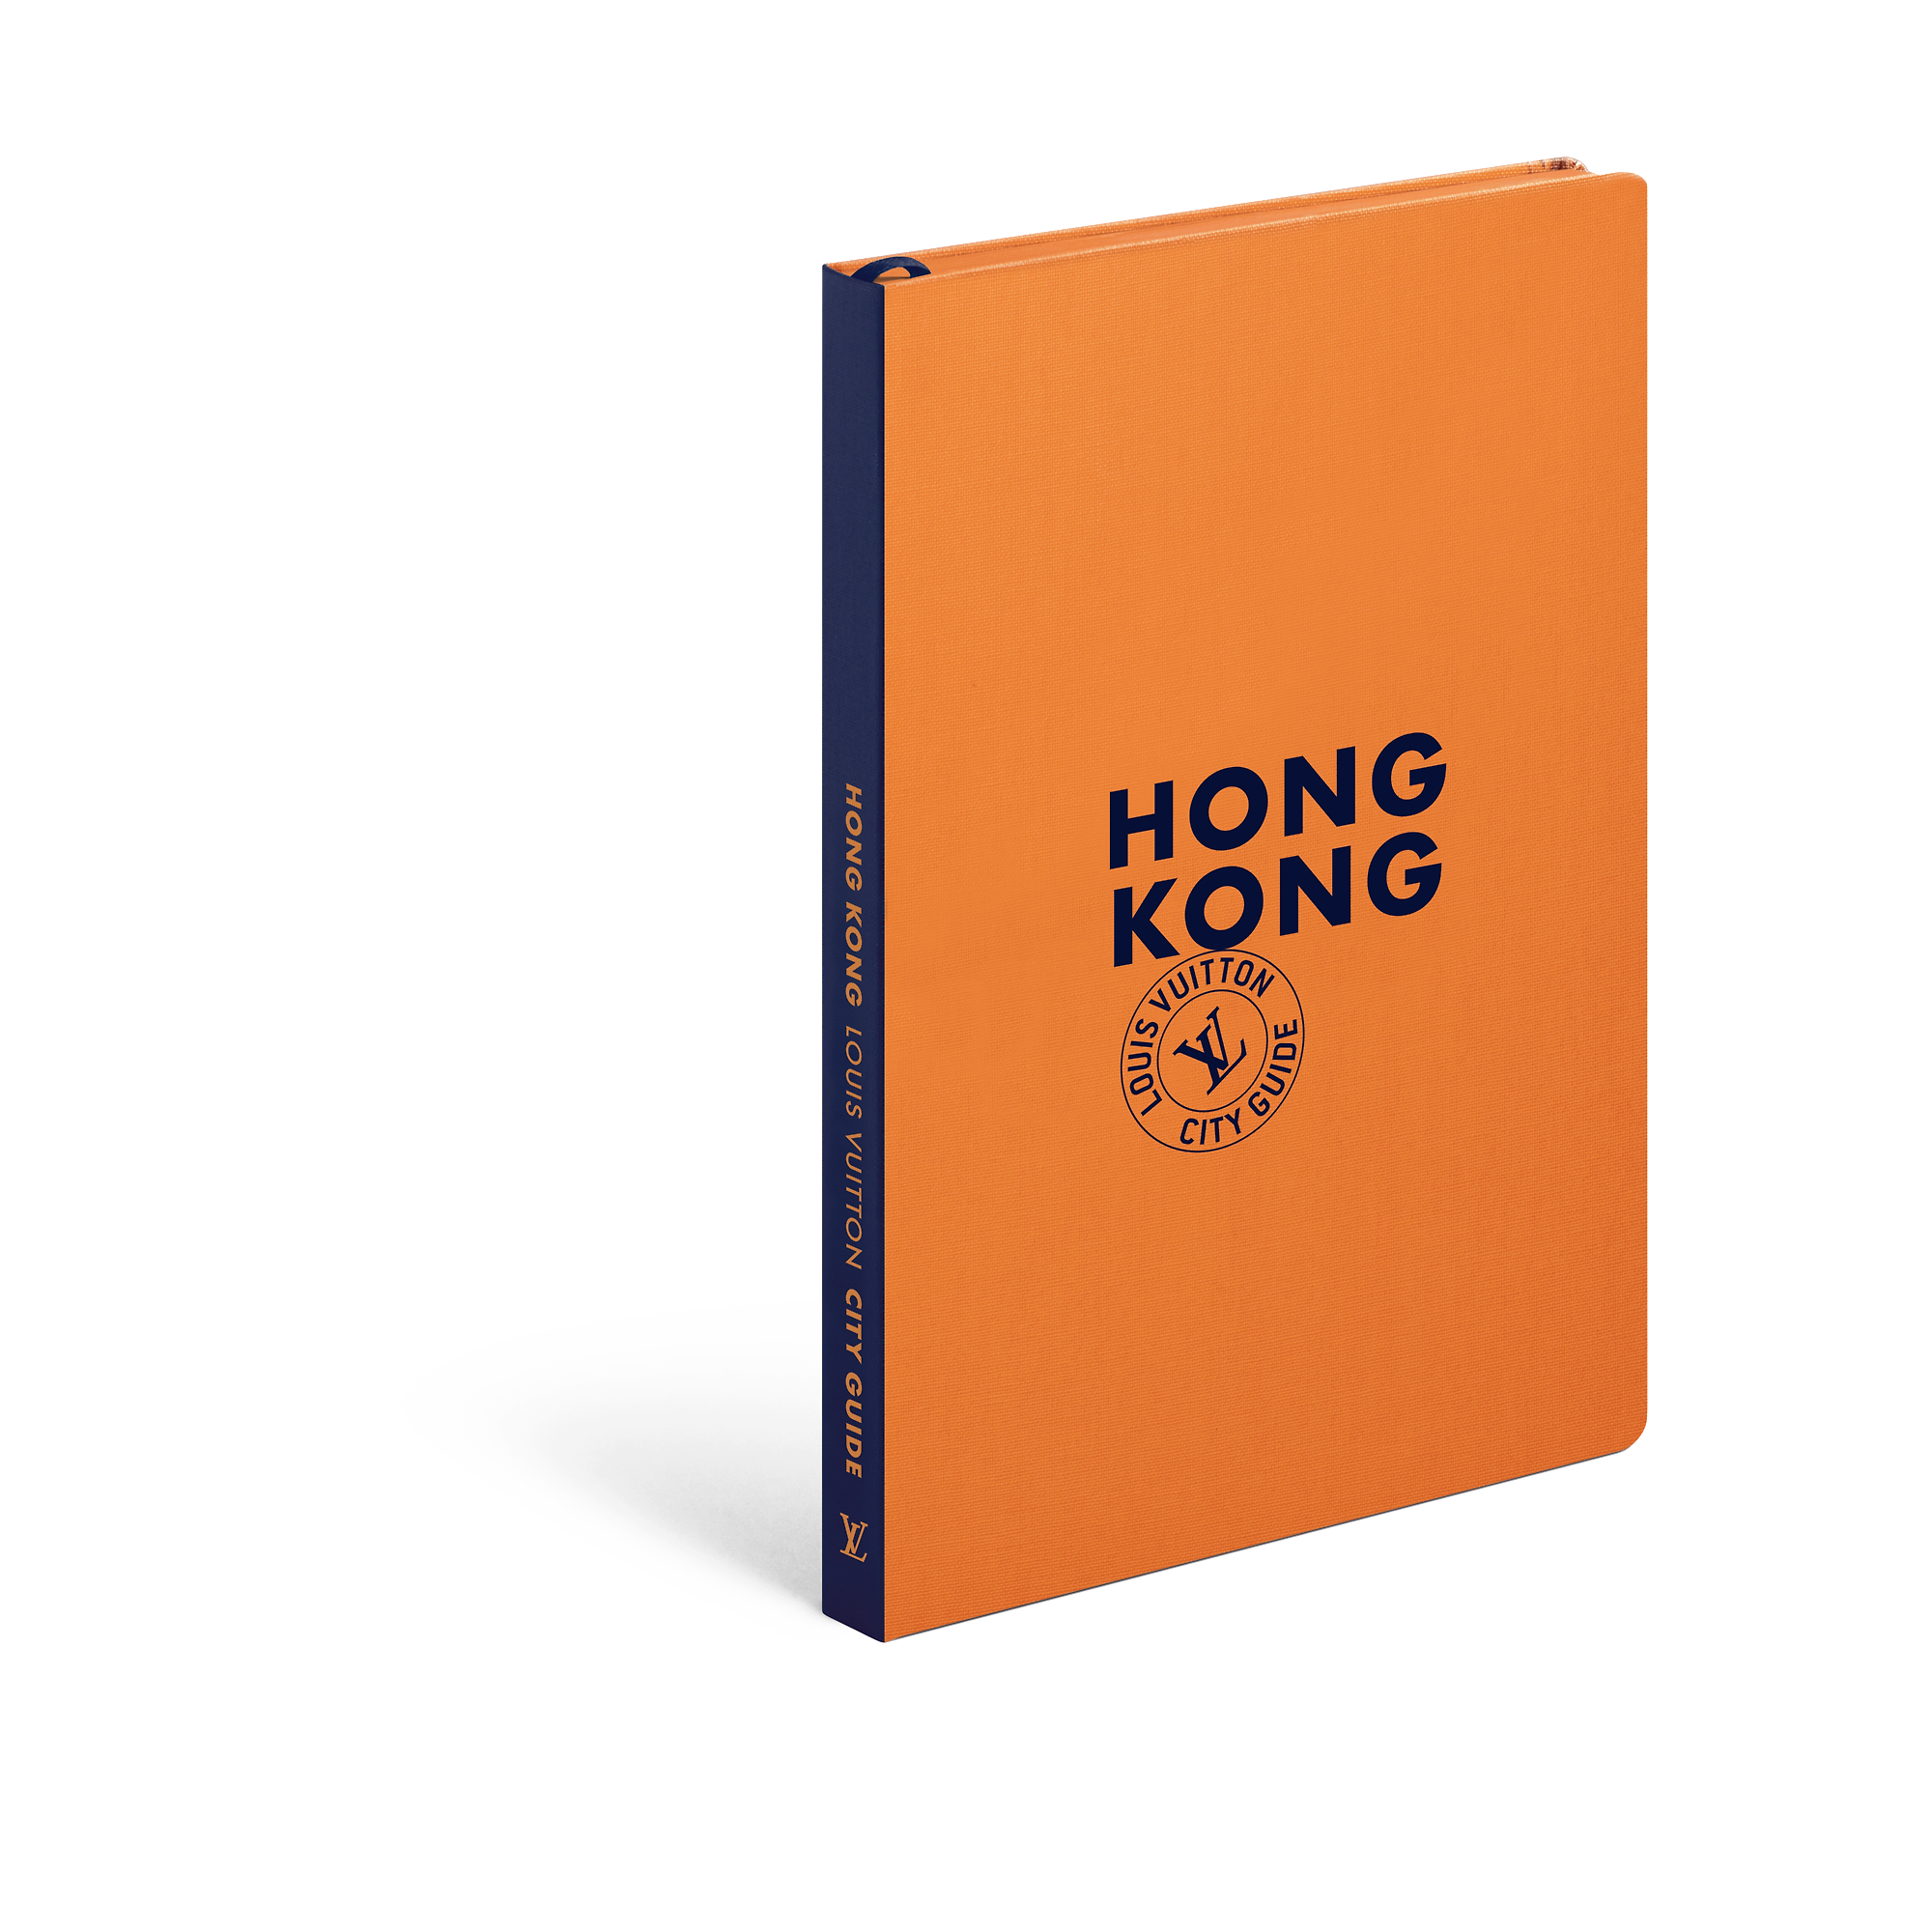 Louis Vuitton City Guide Hong Kong, English Version – Art of Living – Books and Stationery R08968